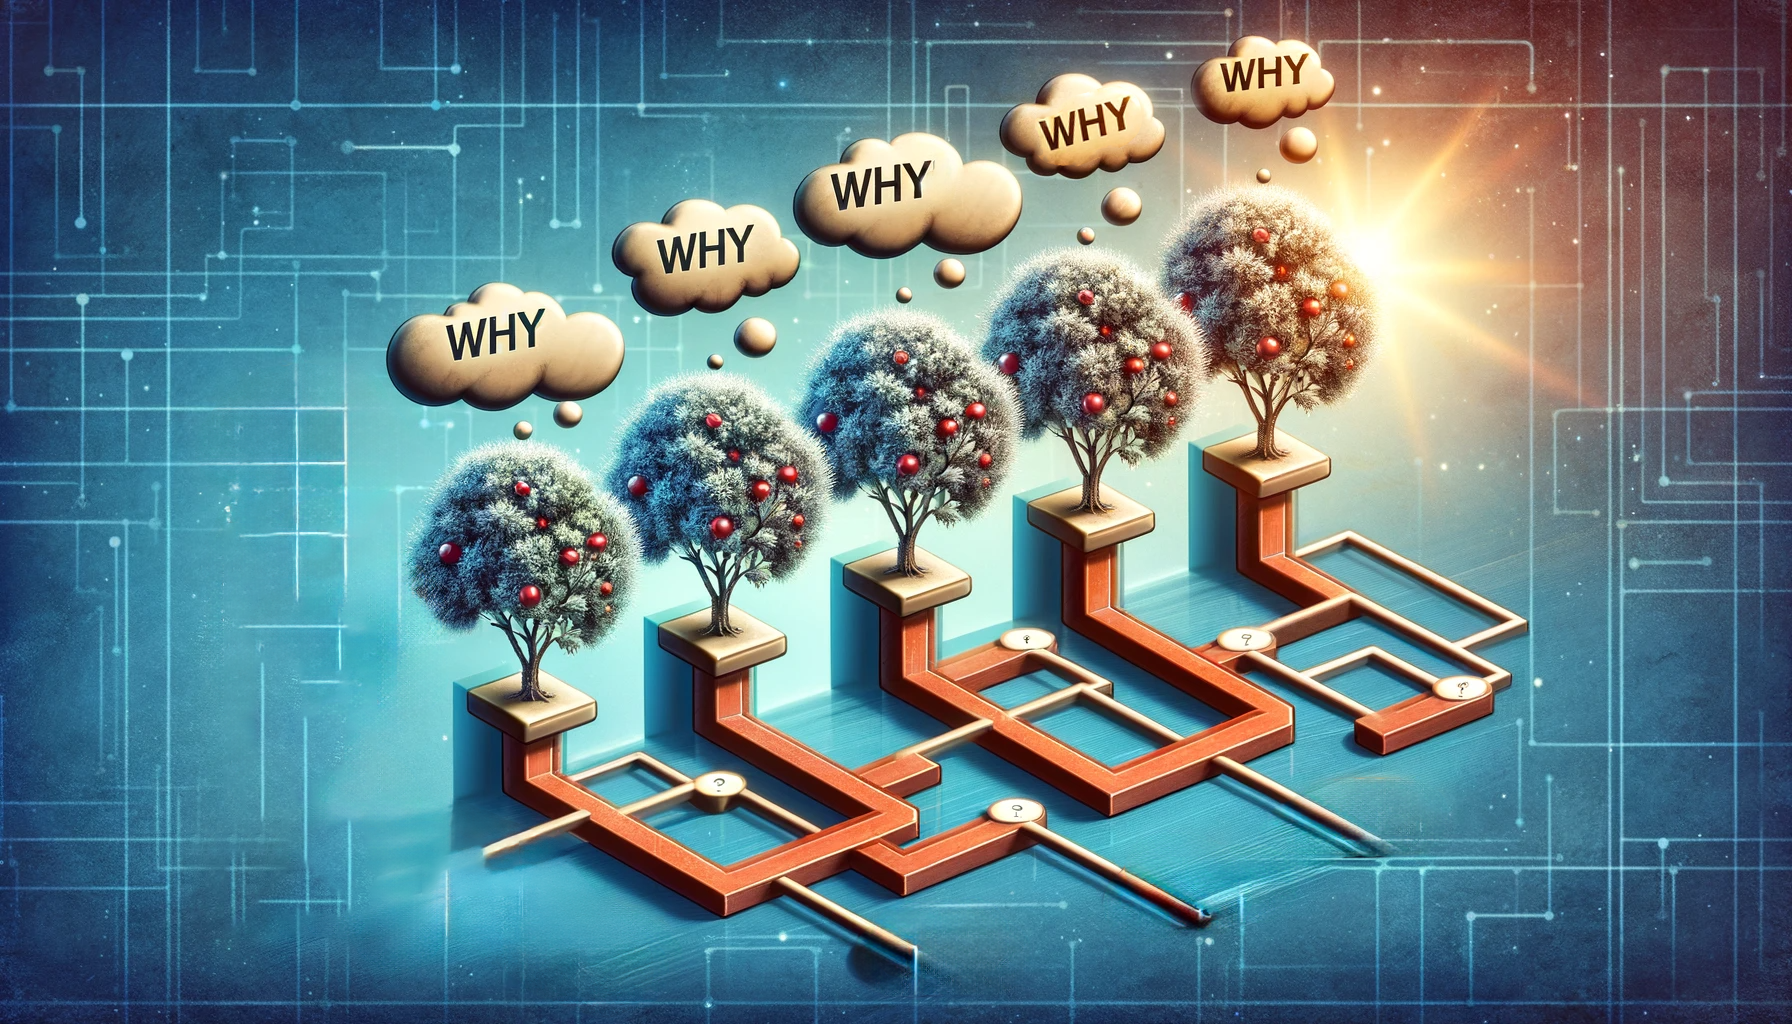 Illustration of the 'Five Whys' technique showing thought bubbles with progressive 'why' questions leading to a root cause.